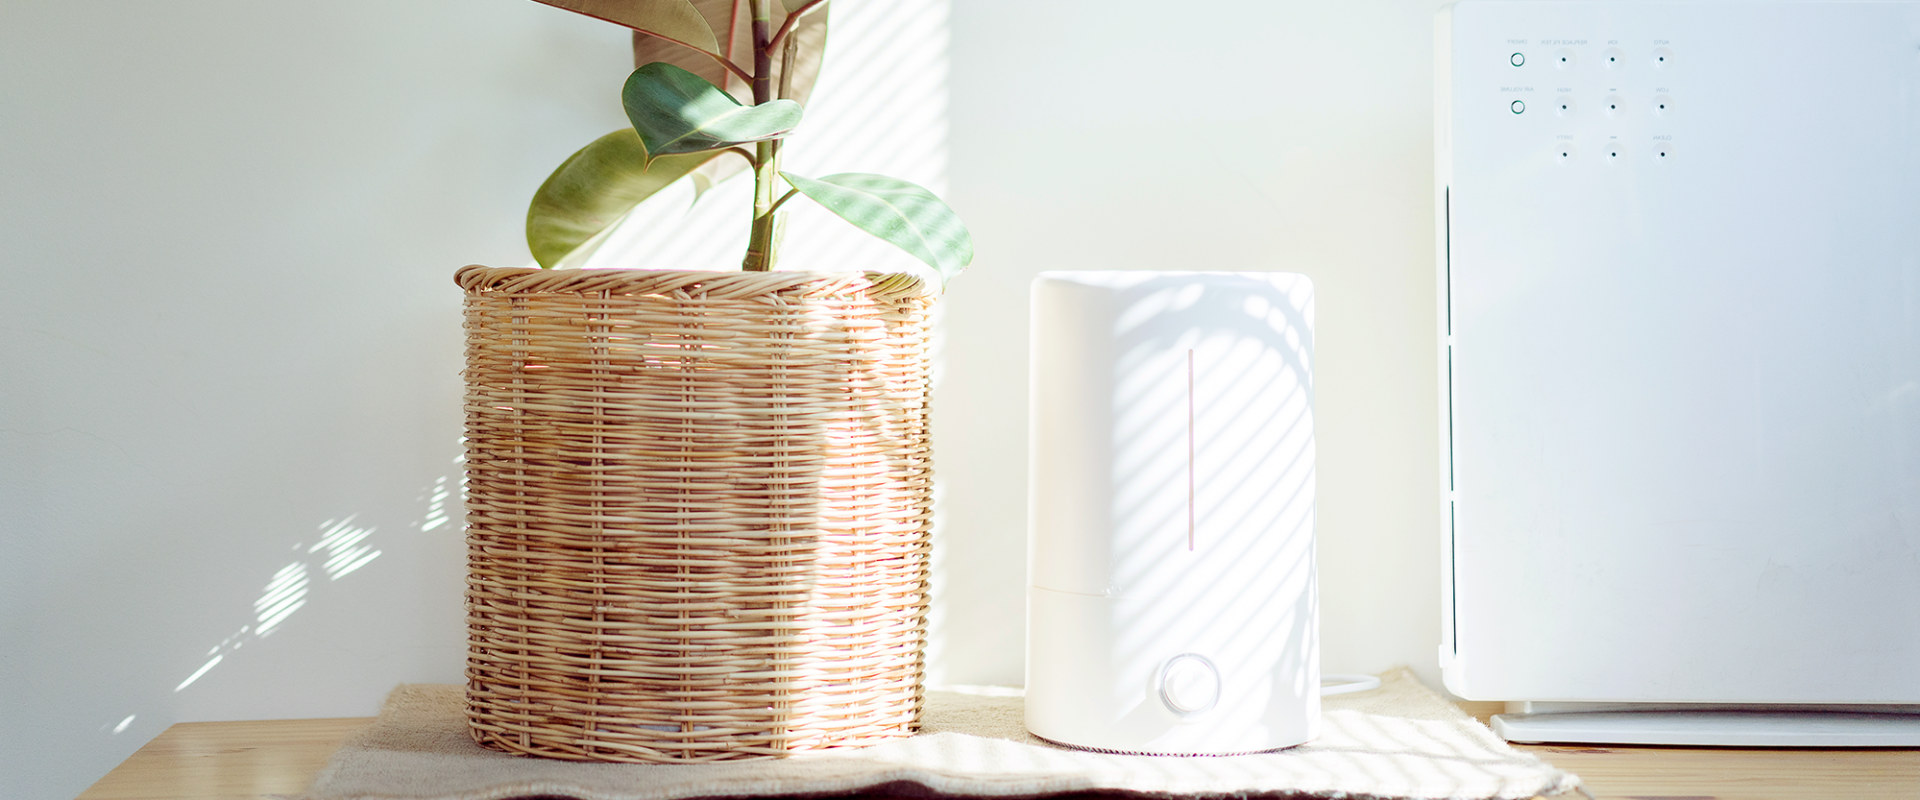 How to Use an Air Purifier for Maximum Performance